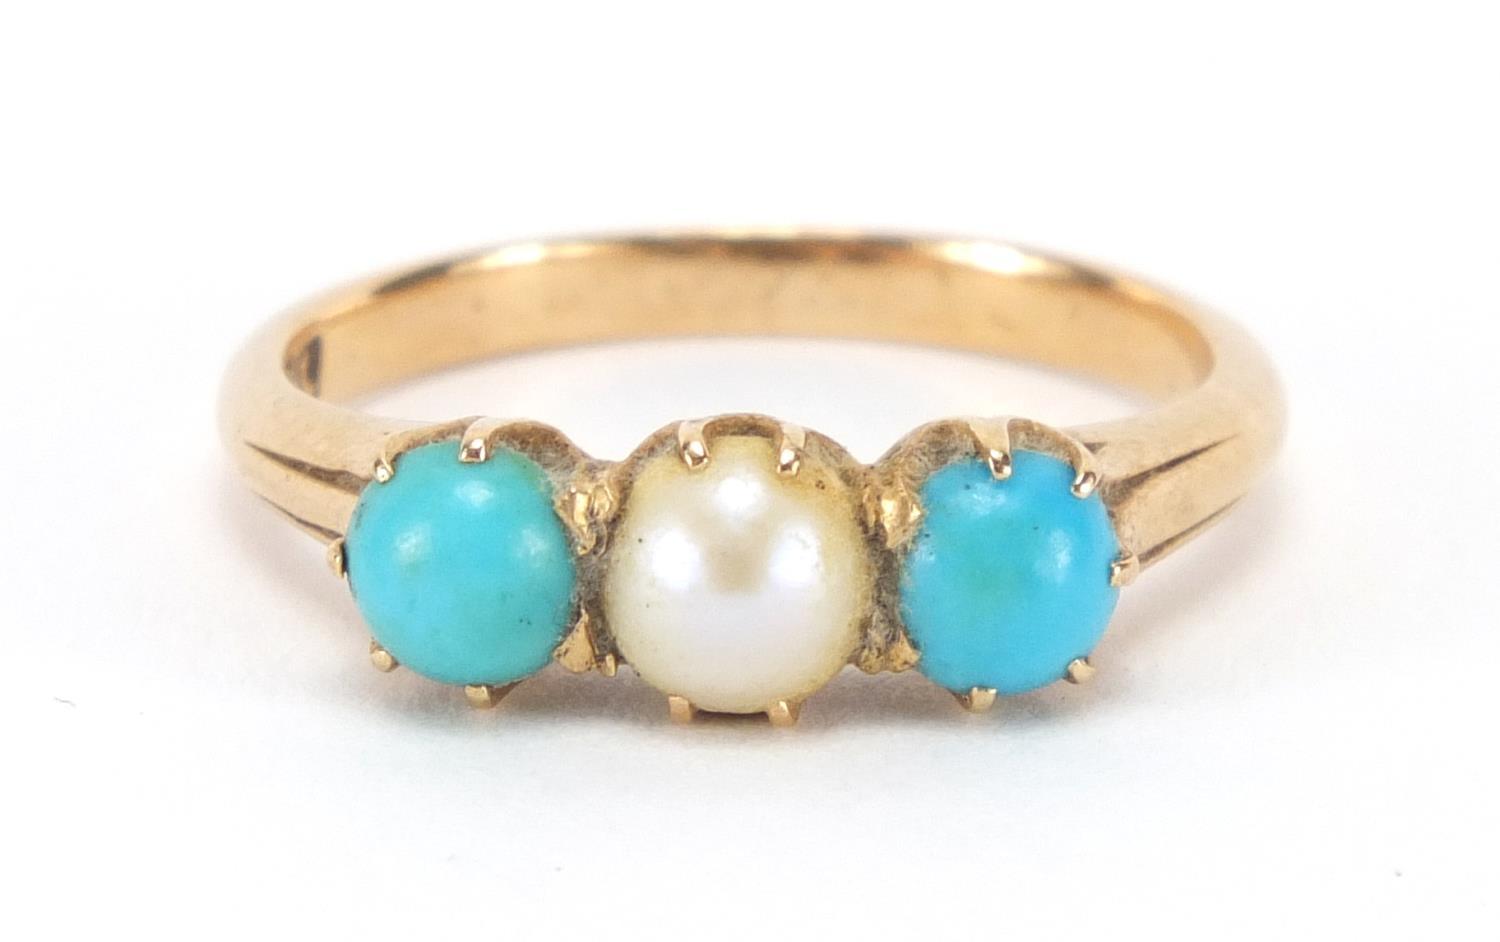 18ct gold pearl and turquoise ring, size M, approximate weight 3.3g : For Extra Condition Reports - Image 2 of 6